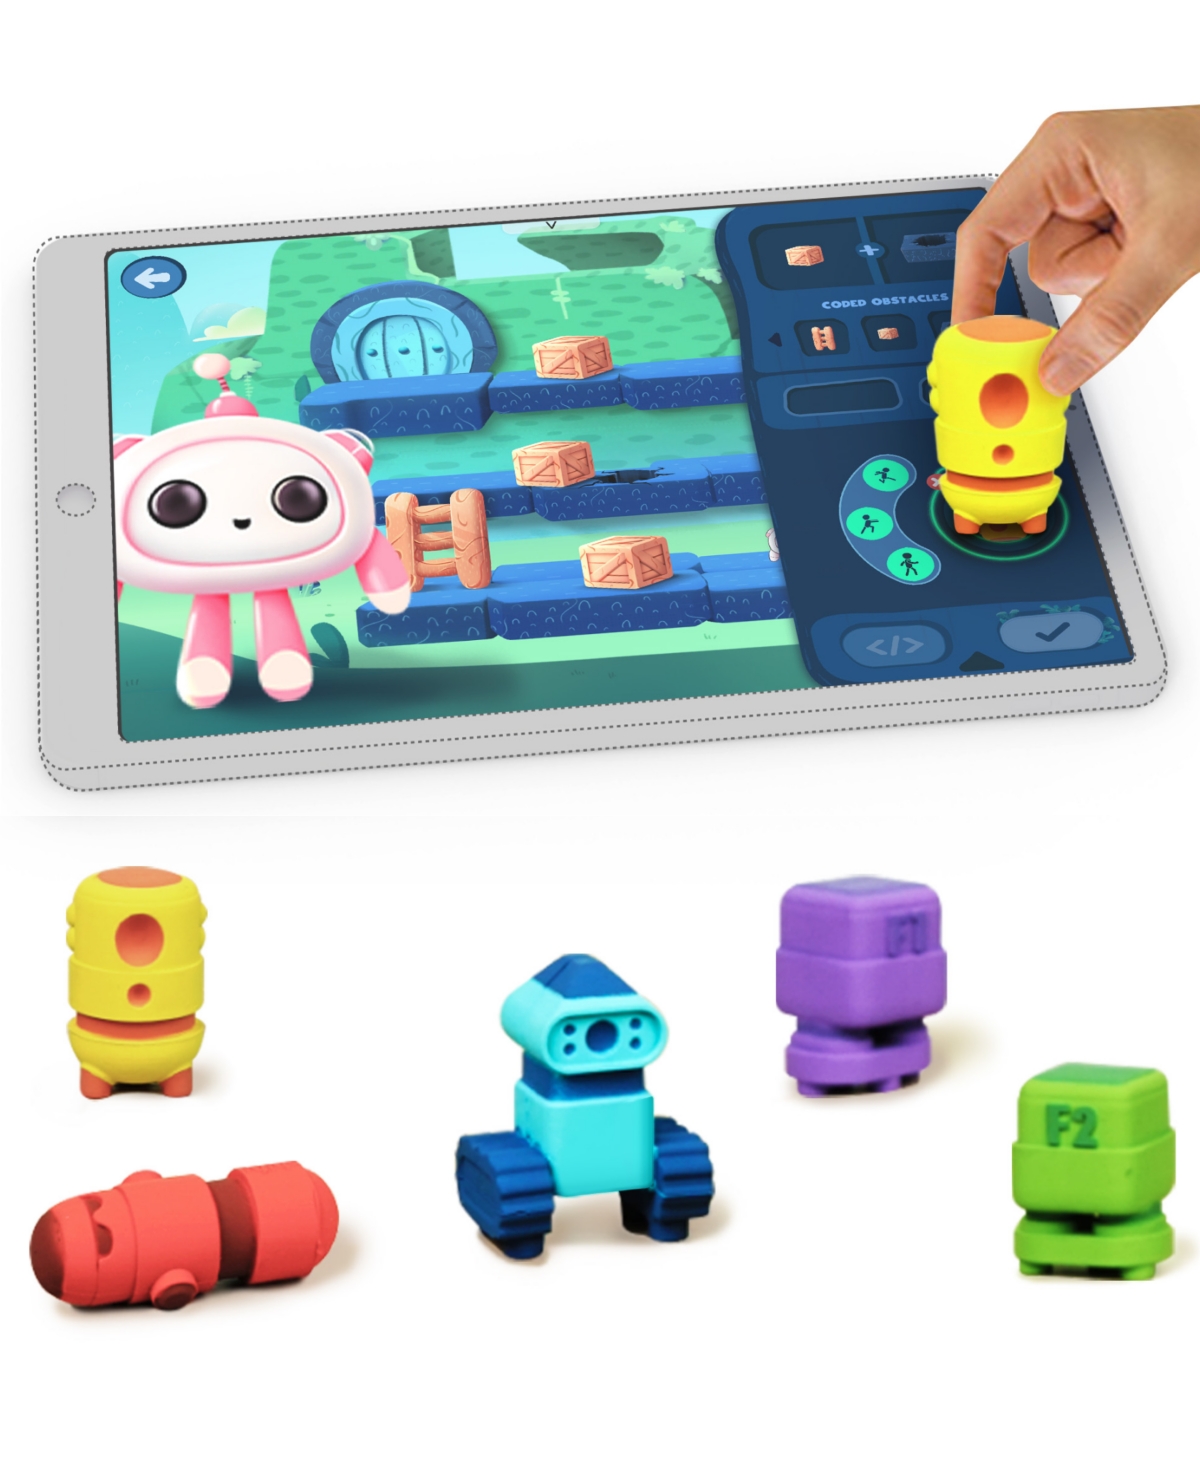 Playshifu Kids' Tacto Coding Stem Interactive Coding Game Set, 7 Pieces In Open Misce